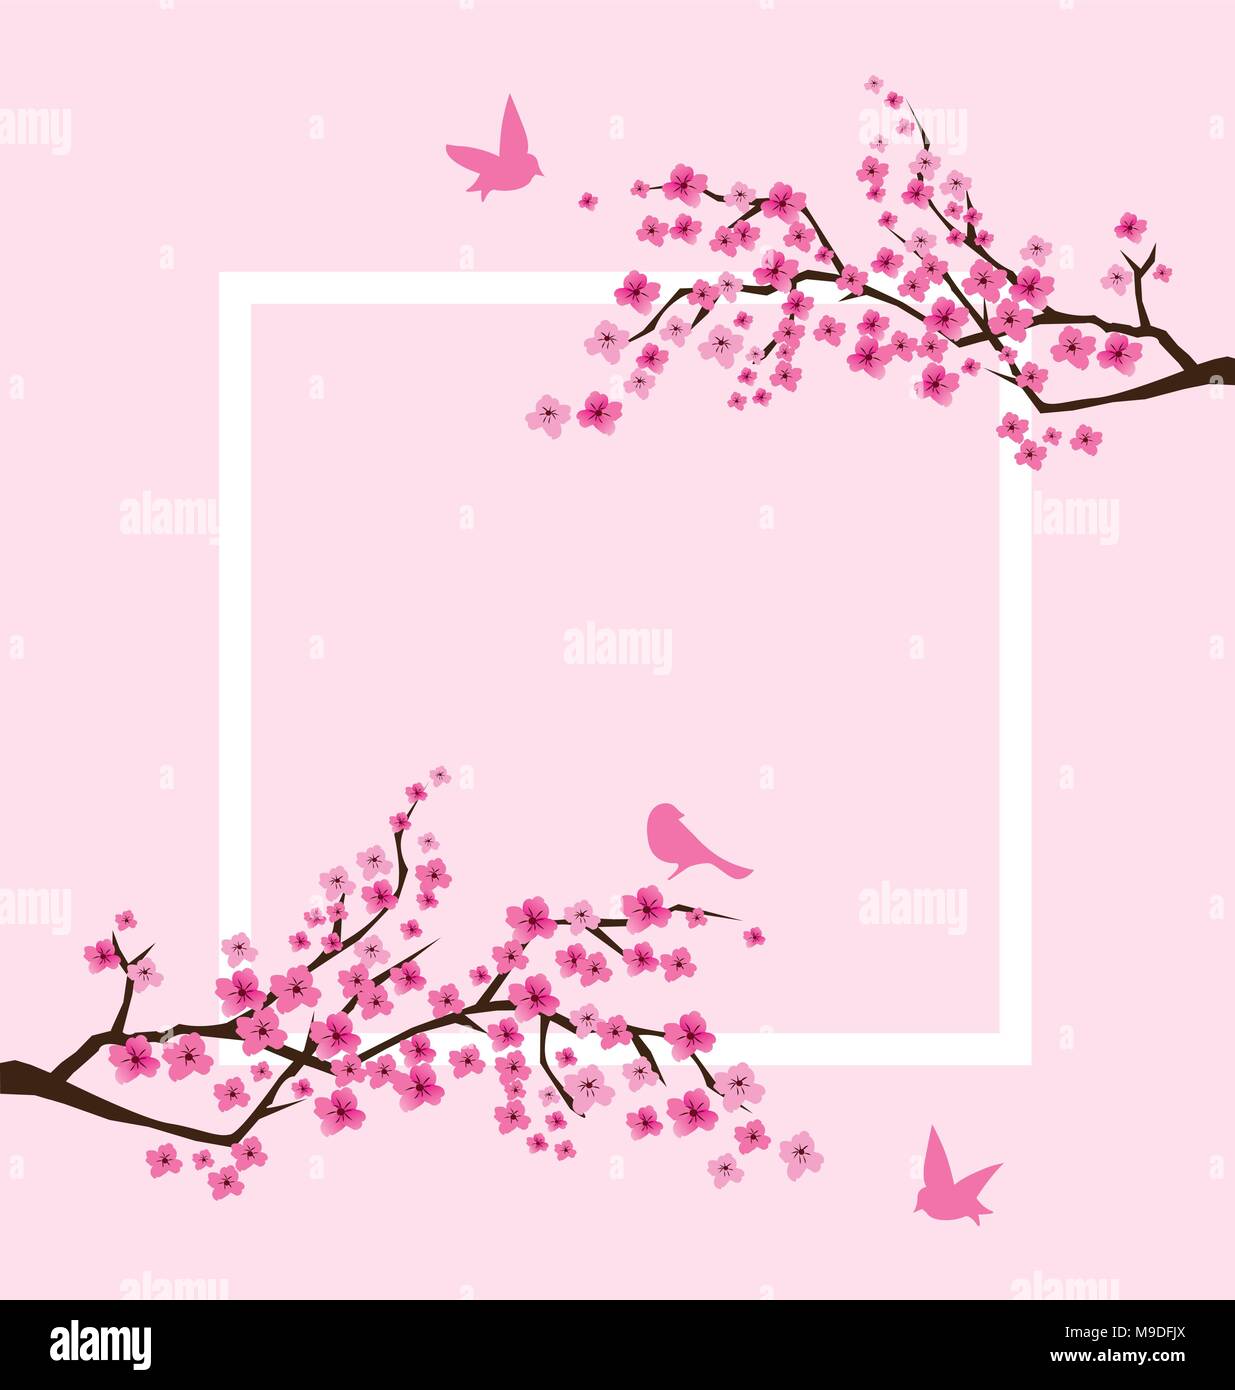 vector illustration of cherry blossom frame with pink birds Stock Vector